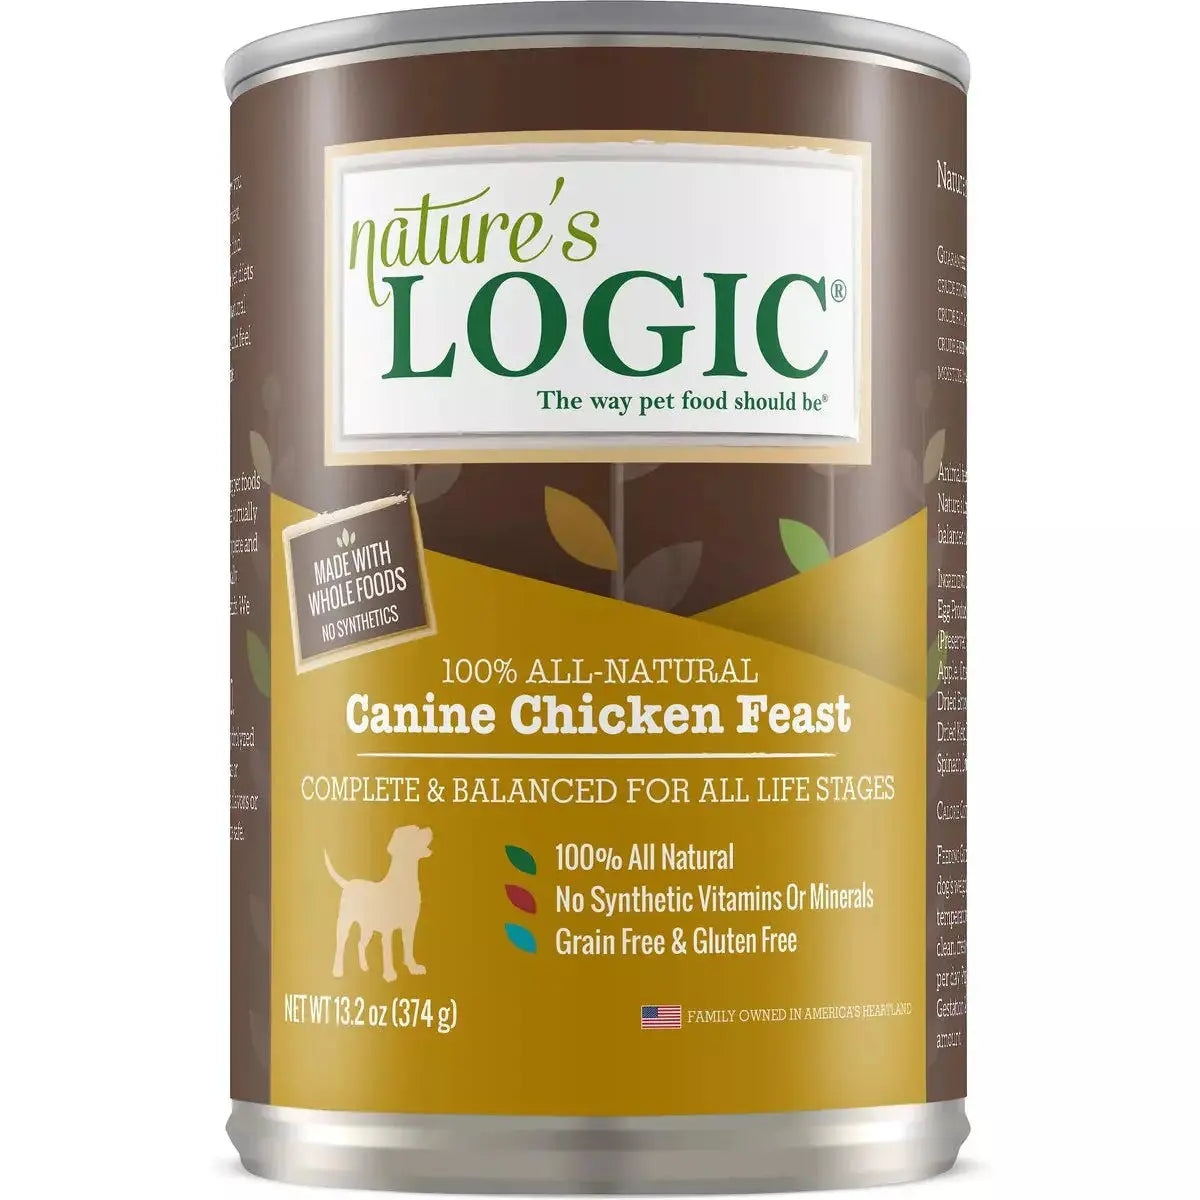 Nature's Logic Canine Chicken Feast Grain-Free Canned Dog Food 13.2 oz case of 12 Nature's Logic